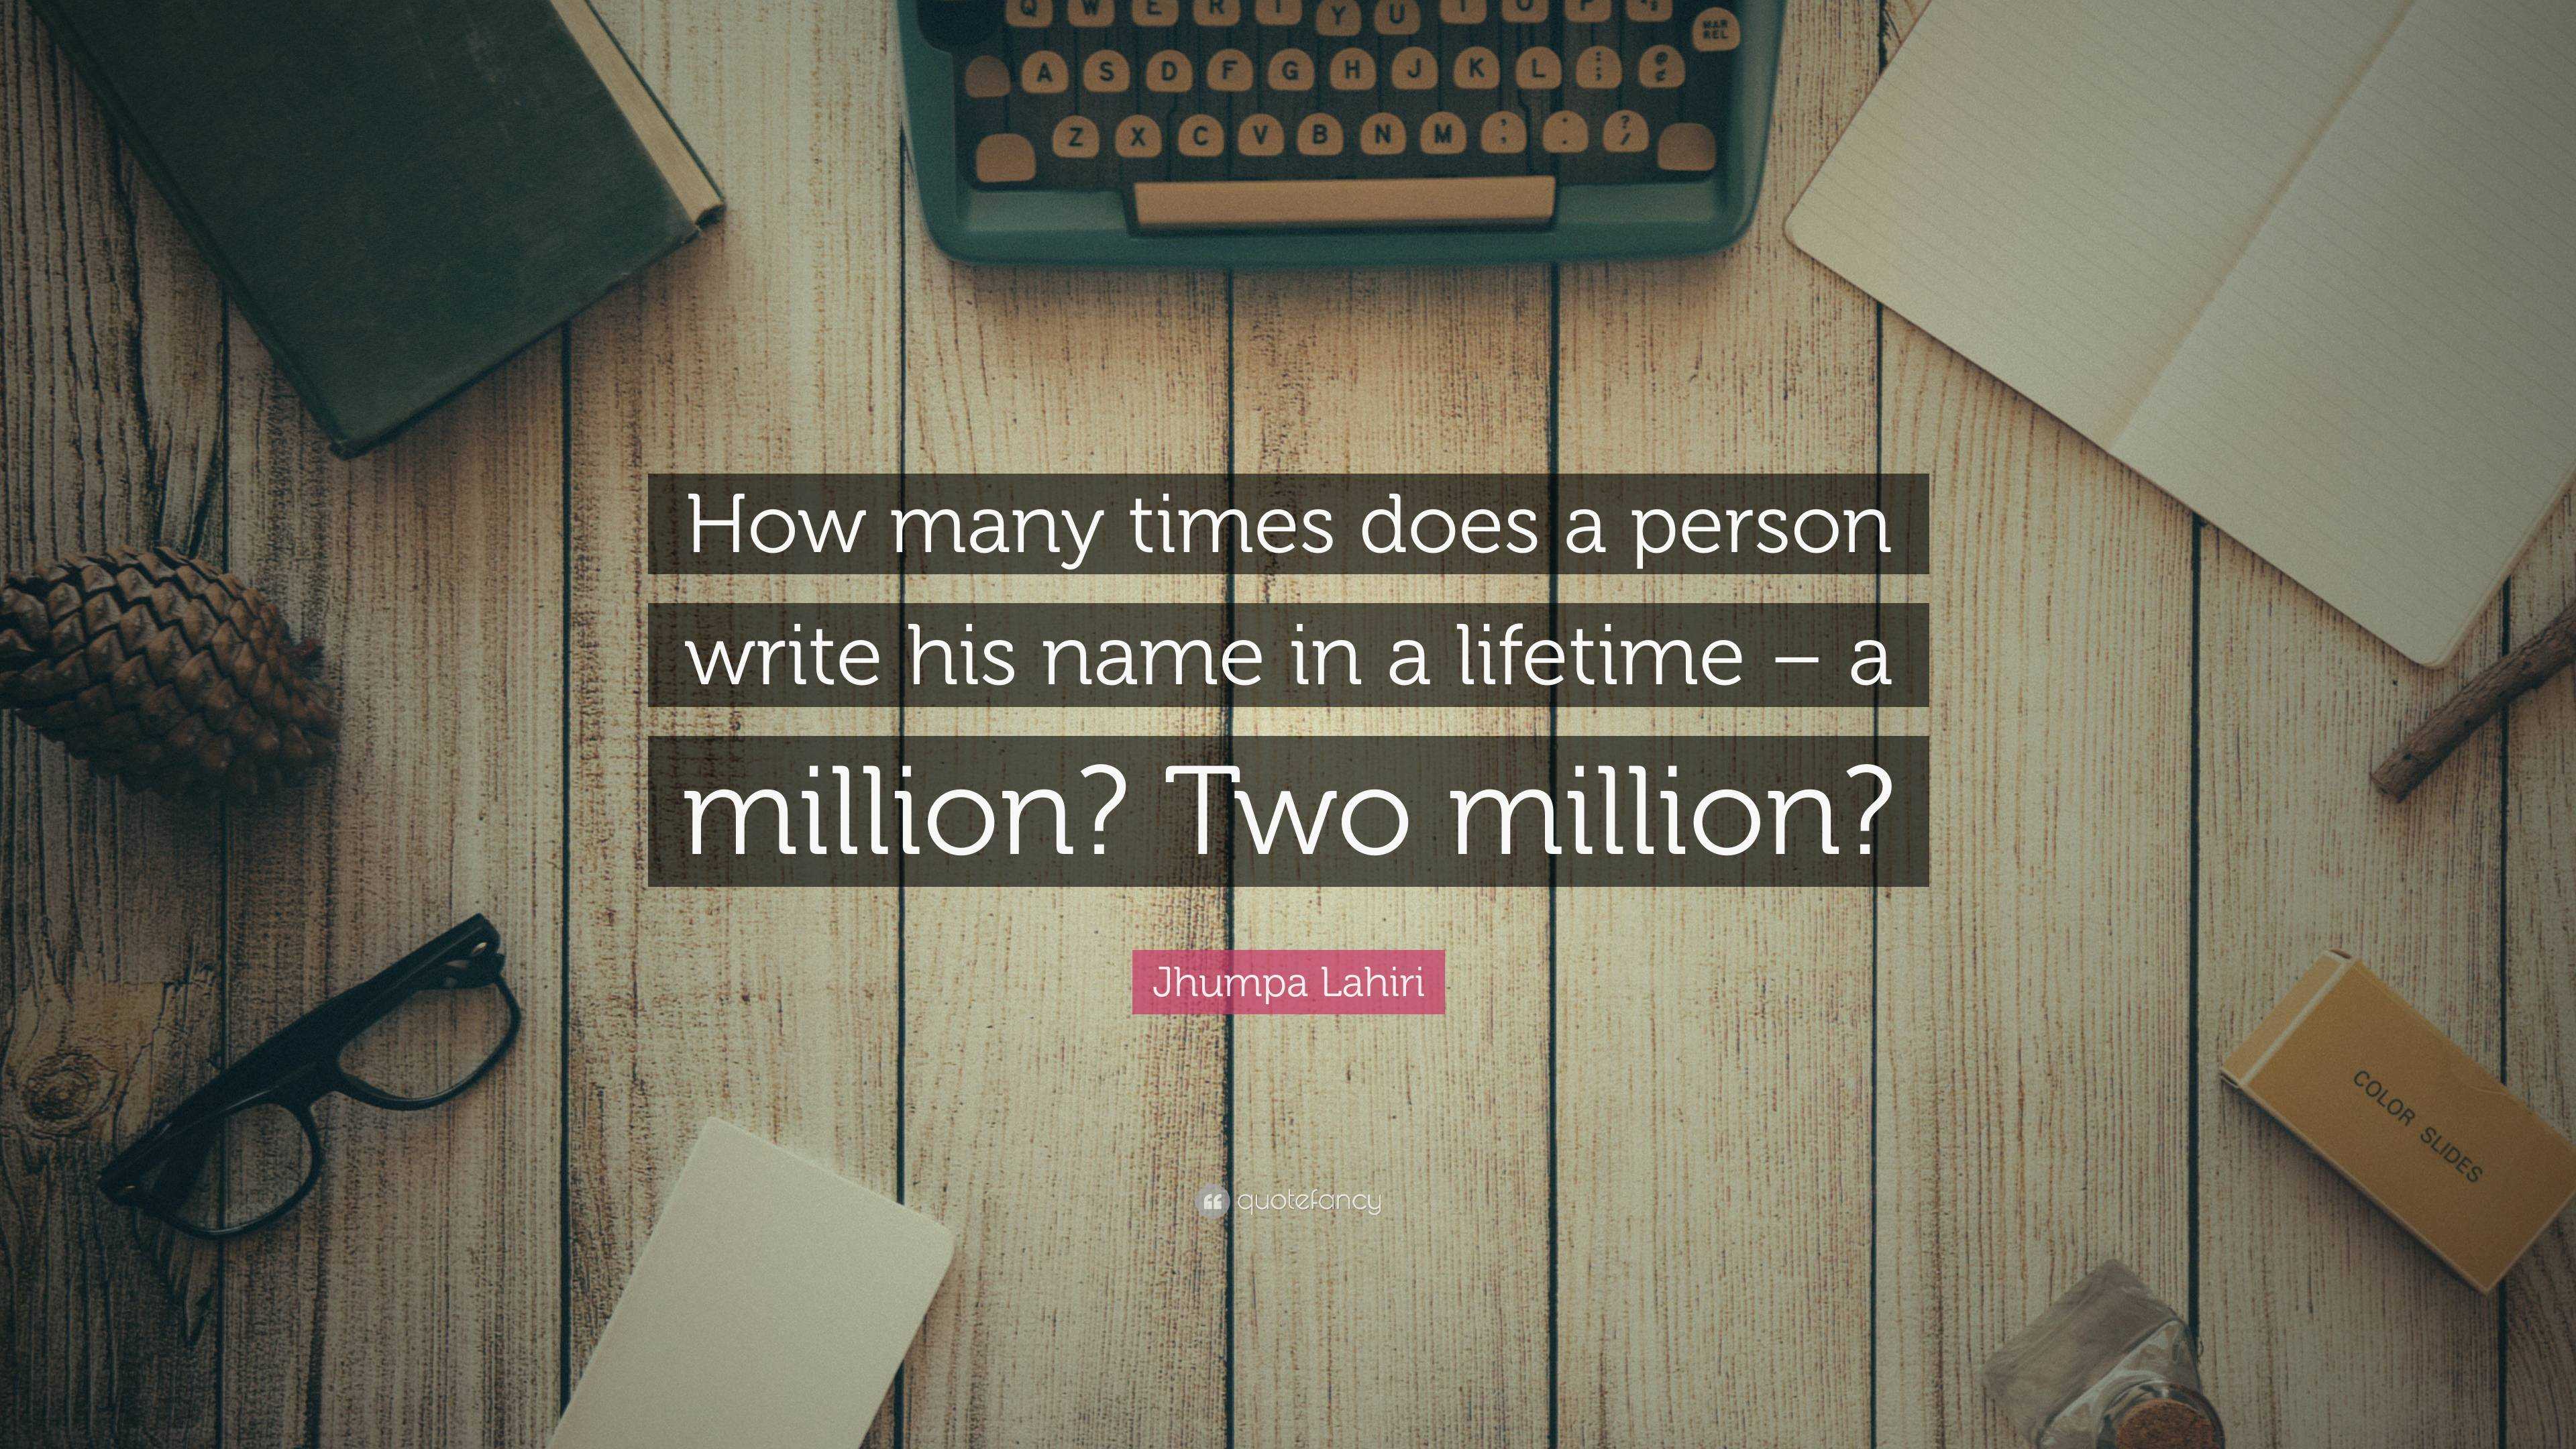 Jhumpa Lahiri Quote: “How many times does a person write his name